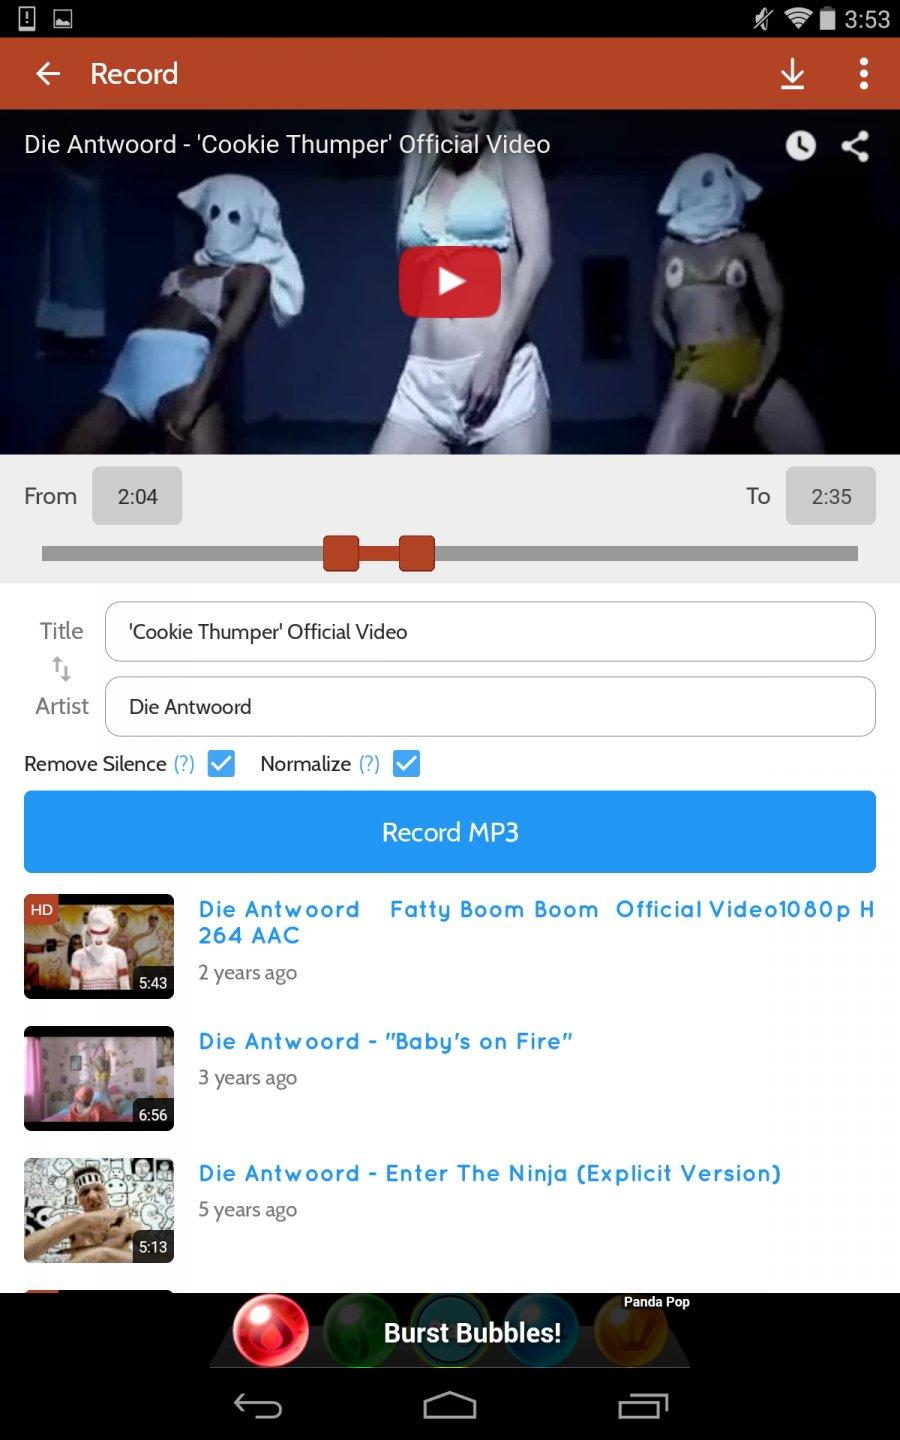 Peggo - YouTube to MP3 Converter for Android - APK Download